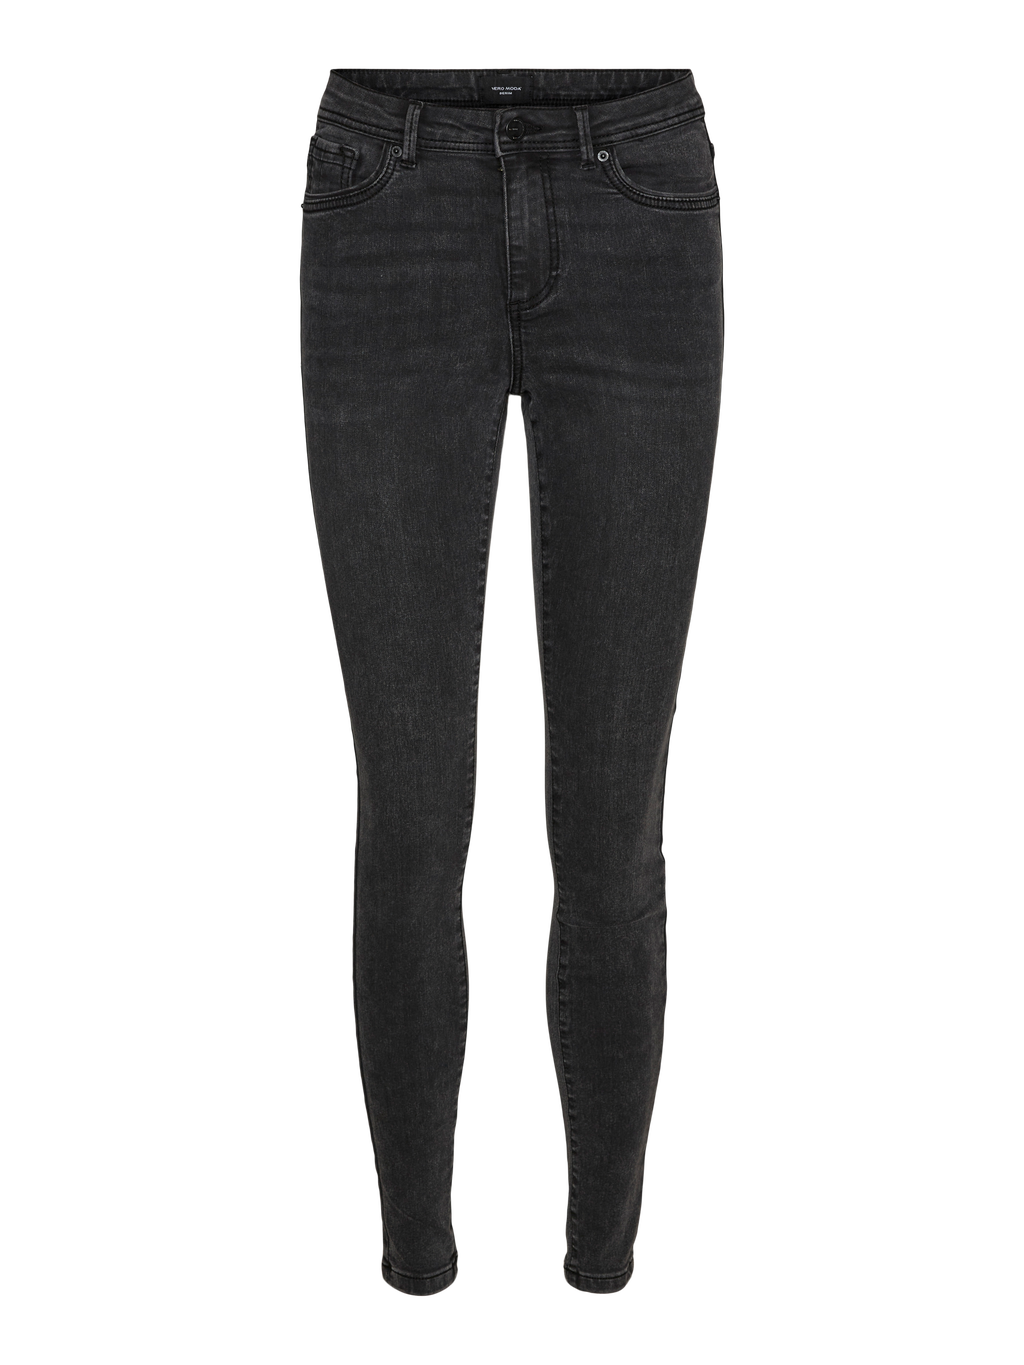 Skinny Fit Jeans With 20 Discount Vero Moda®